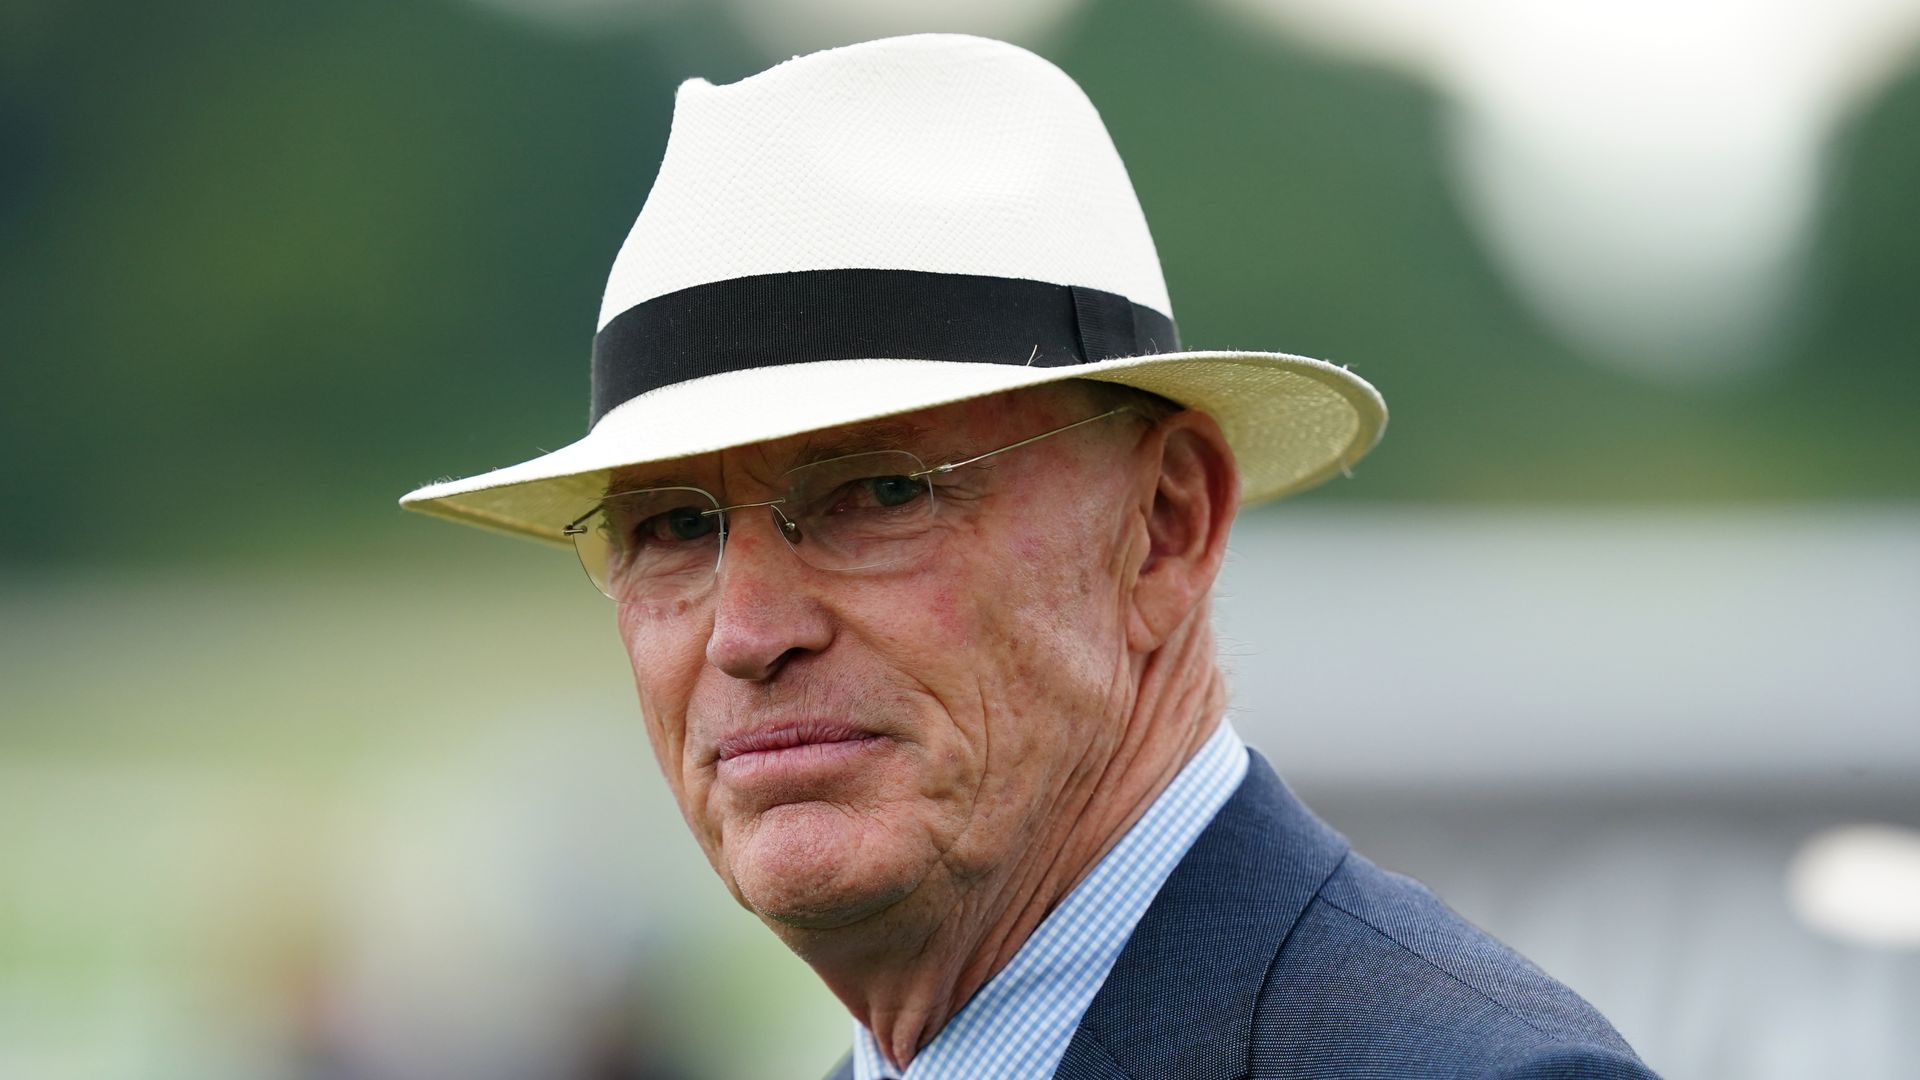 Exciting Gosden handicapper could shine at Southwell